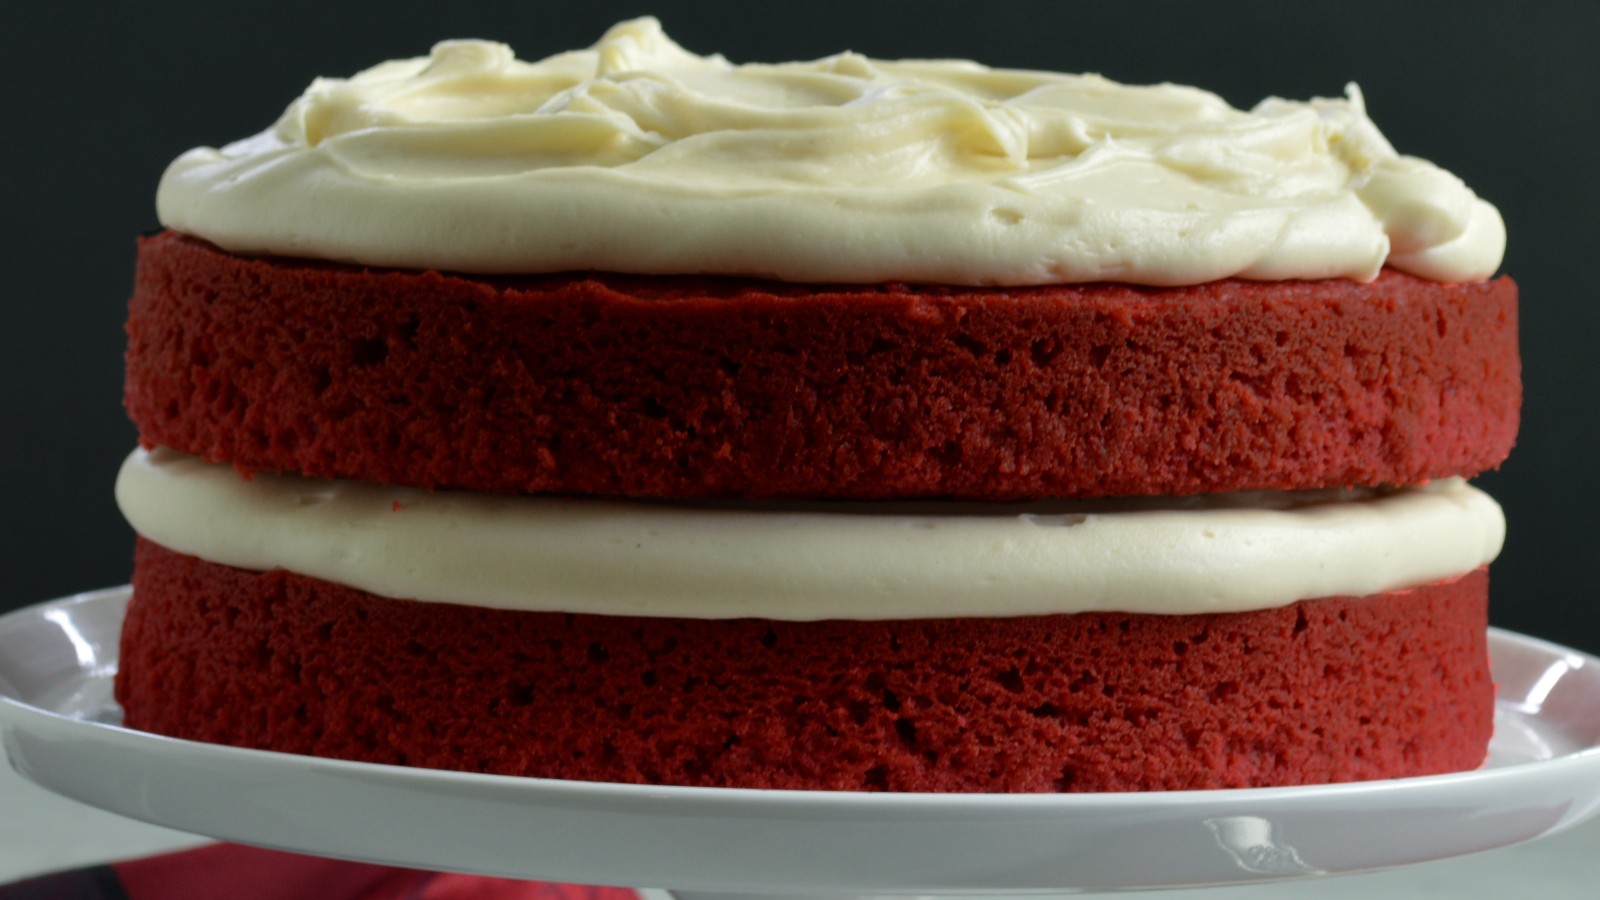 Image of Red Velvet Cake or Cupcakes